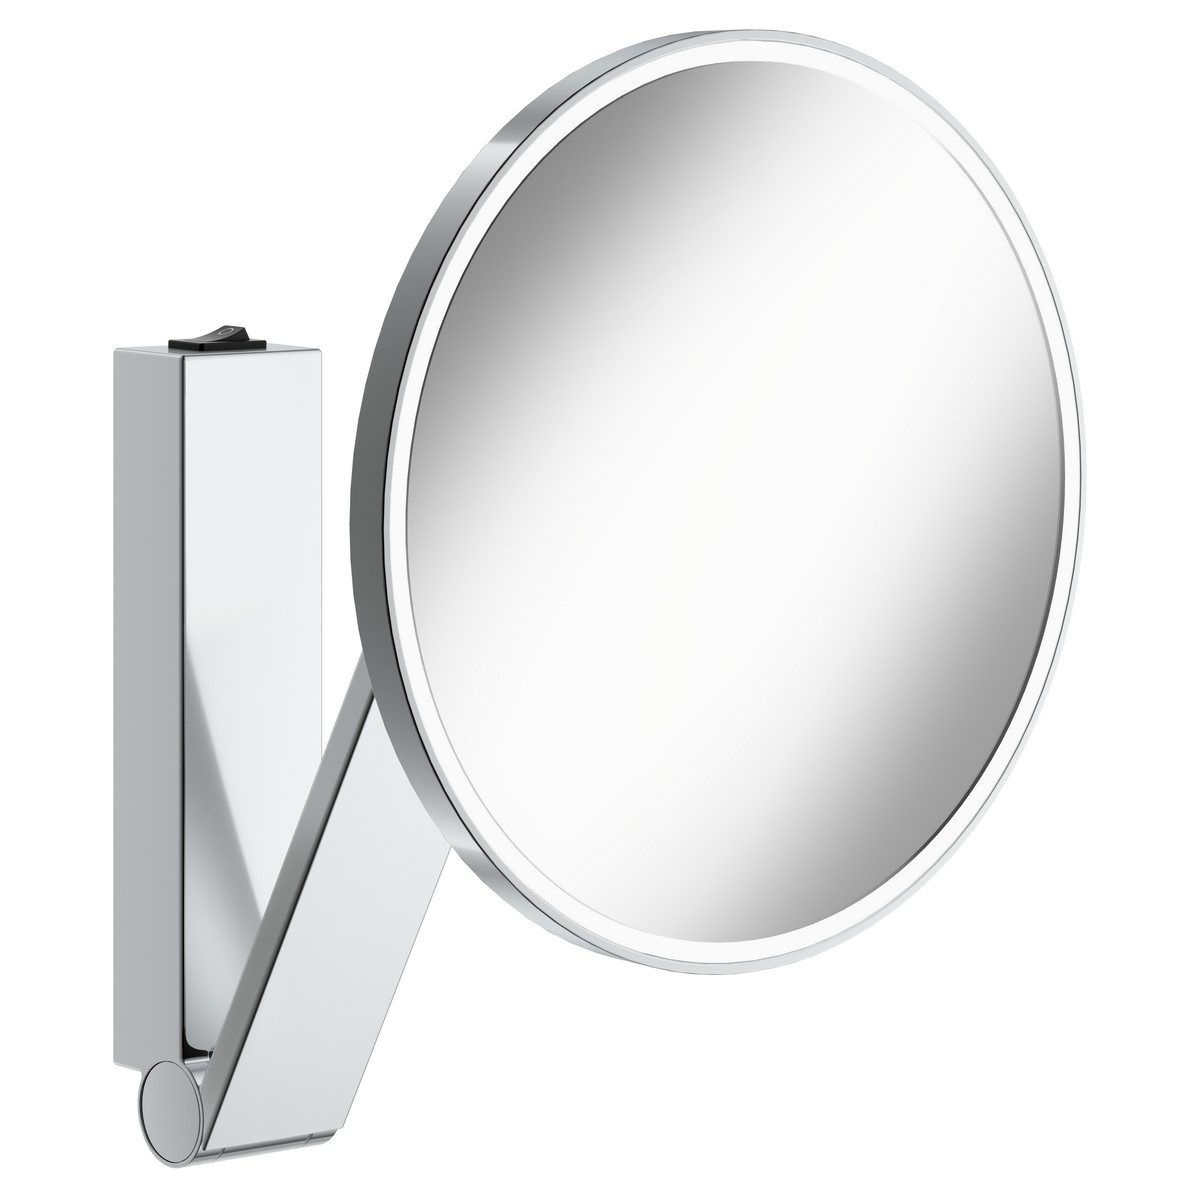 KEUCO 17612054 ILOOK MOVE 8 3/8 INCH WALL MOUNTED FRAMED ROUND 6000K LED BATHROOM MIRROR WITH ROCKER SWITCH OPERATION